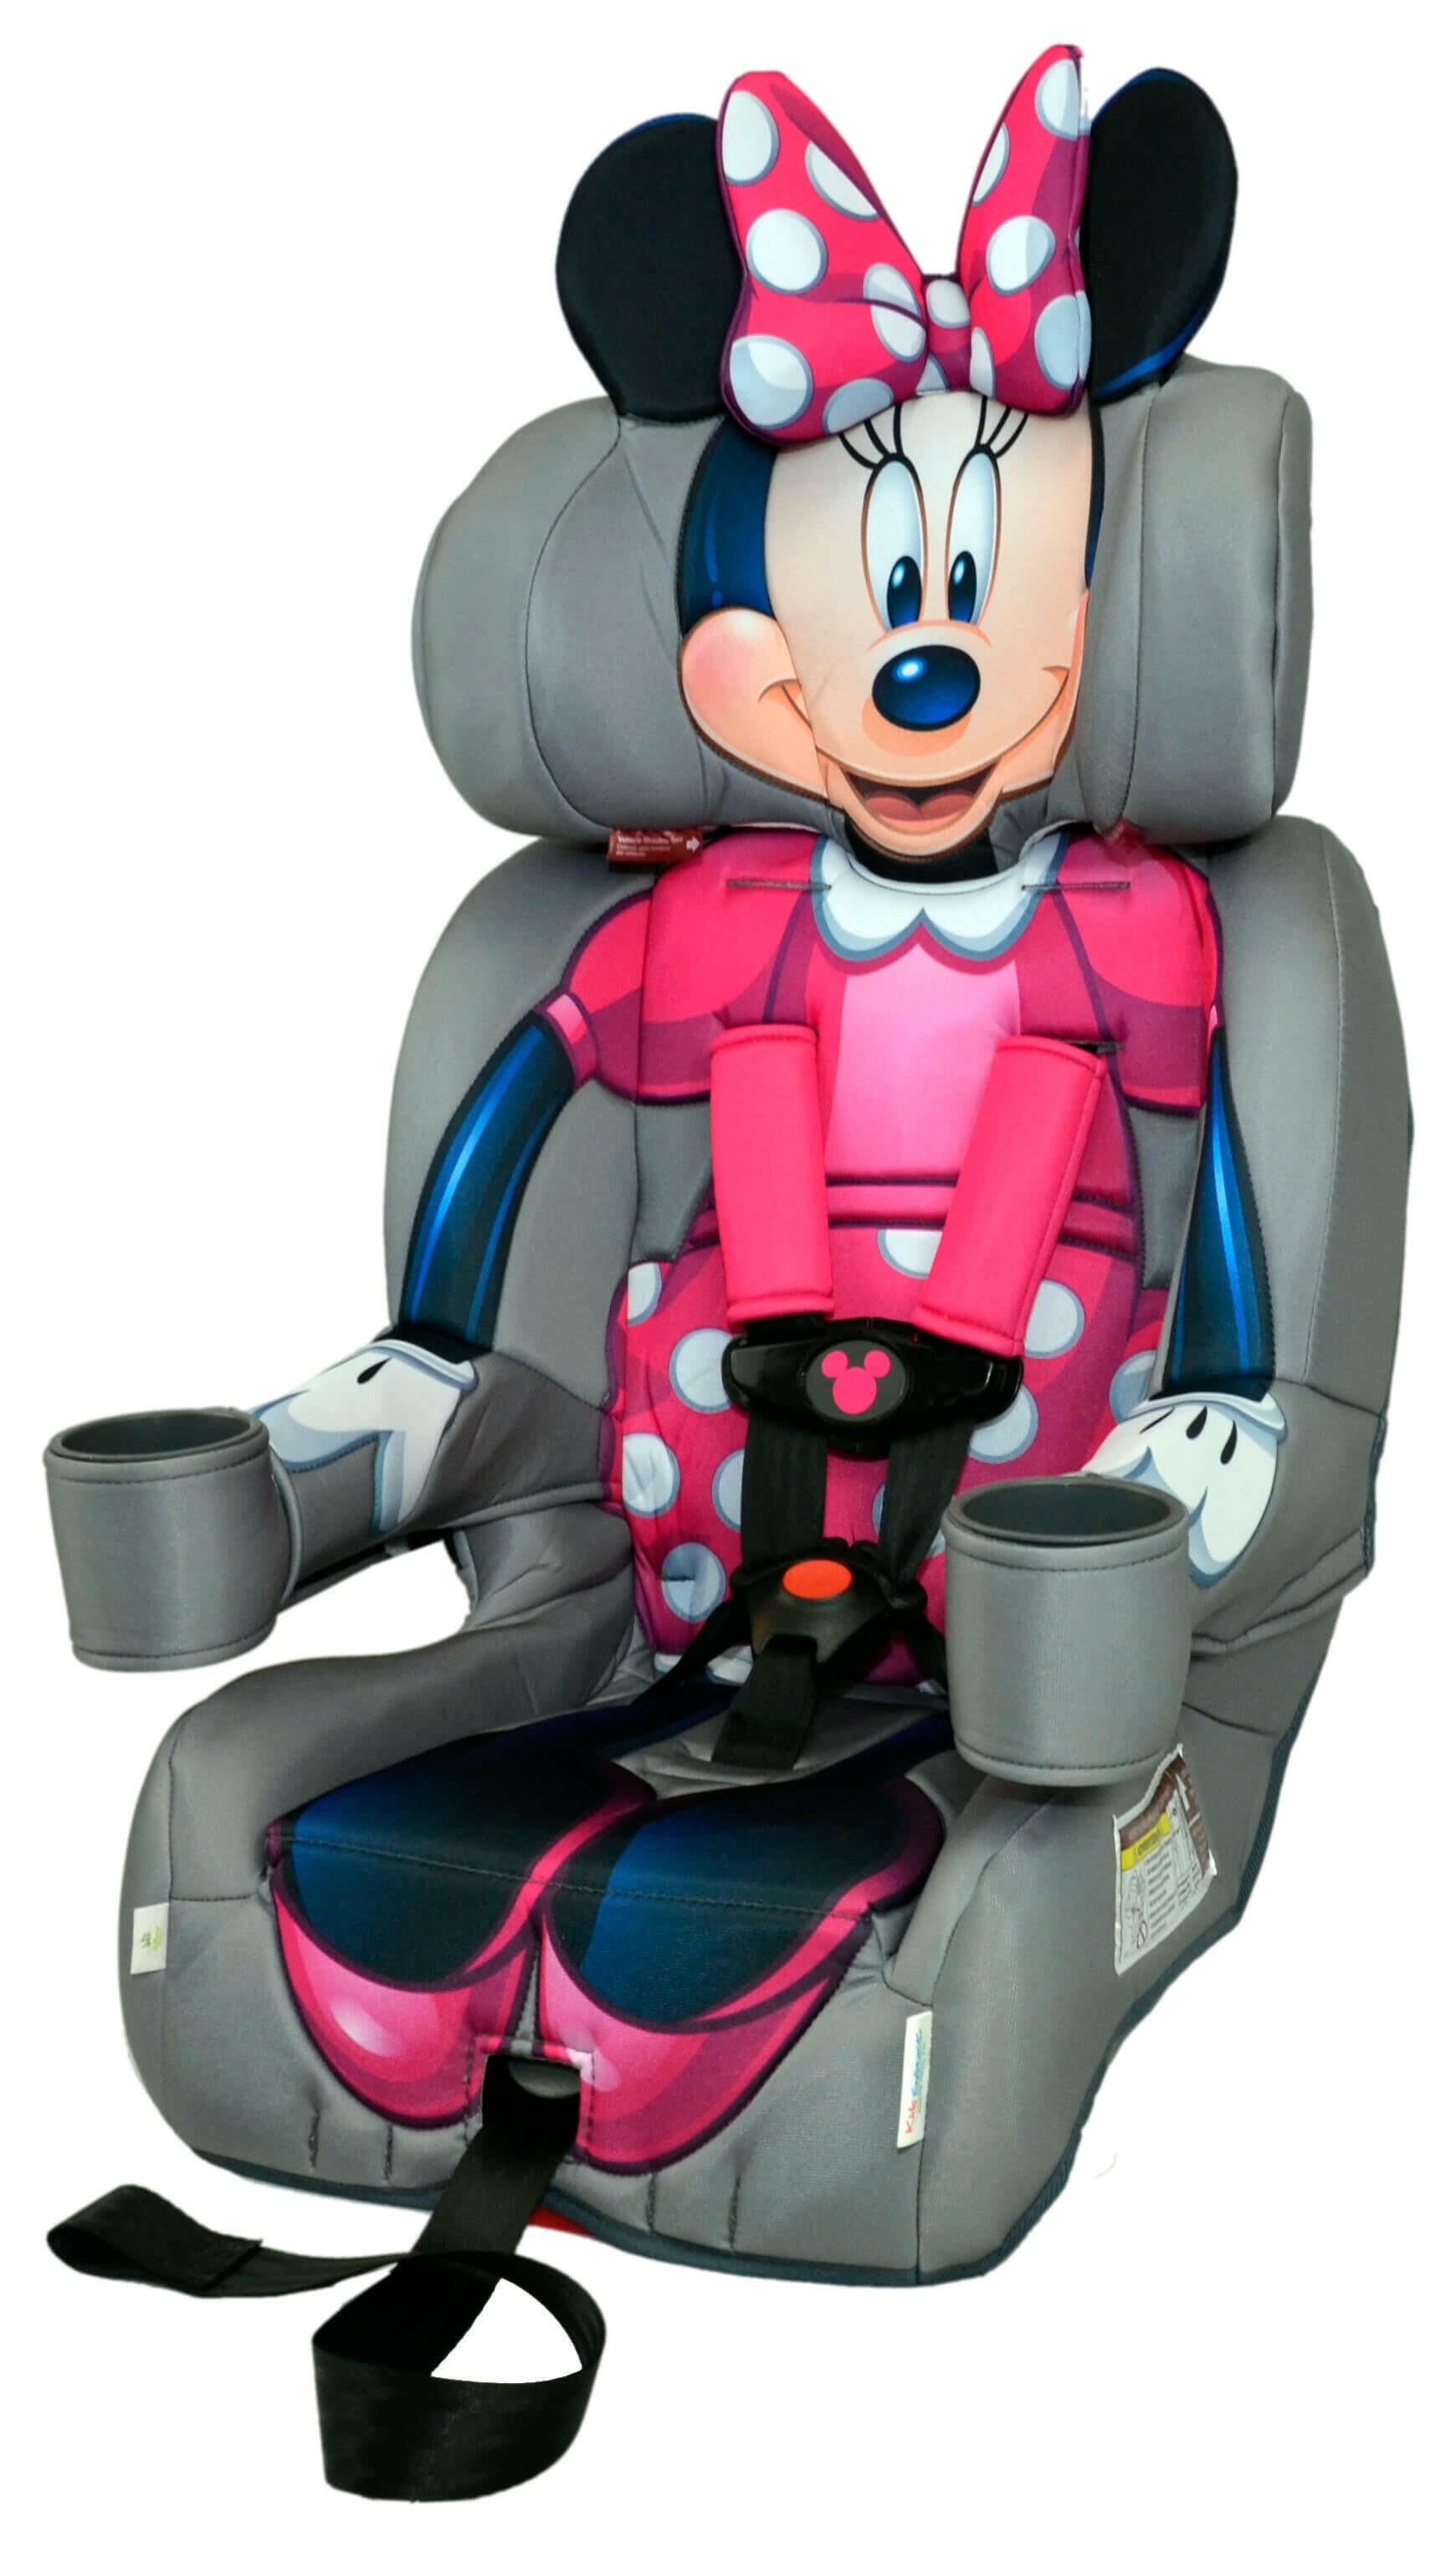 Disney Kids Minnie Mouse Adjustable Harness Booster Seat - Kids Eye Candy 